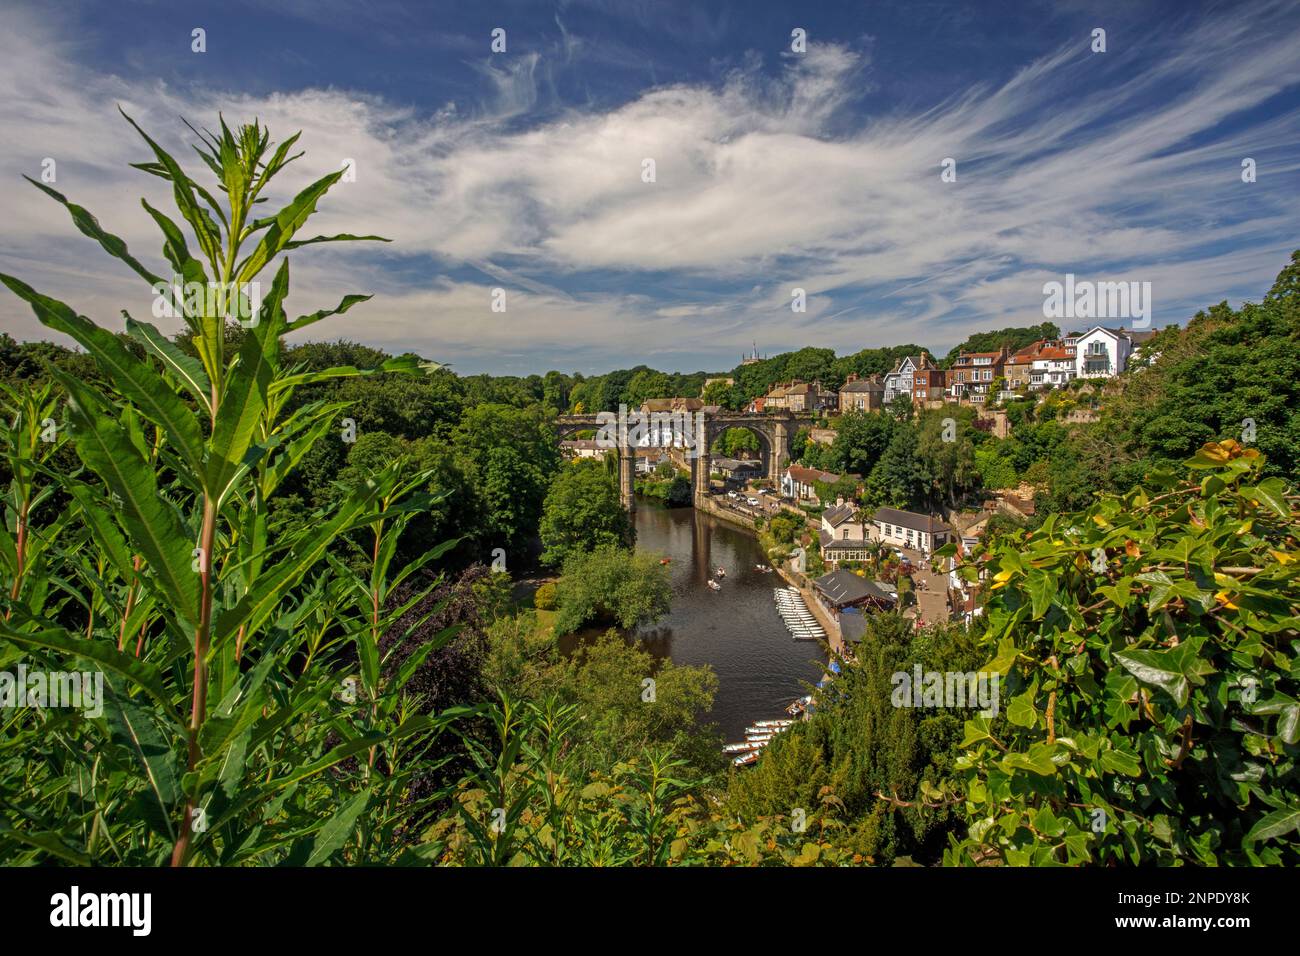 A view of Knaresborough and the River Nidd in summertime. Stock Photo